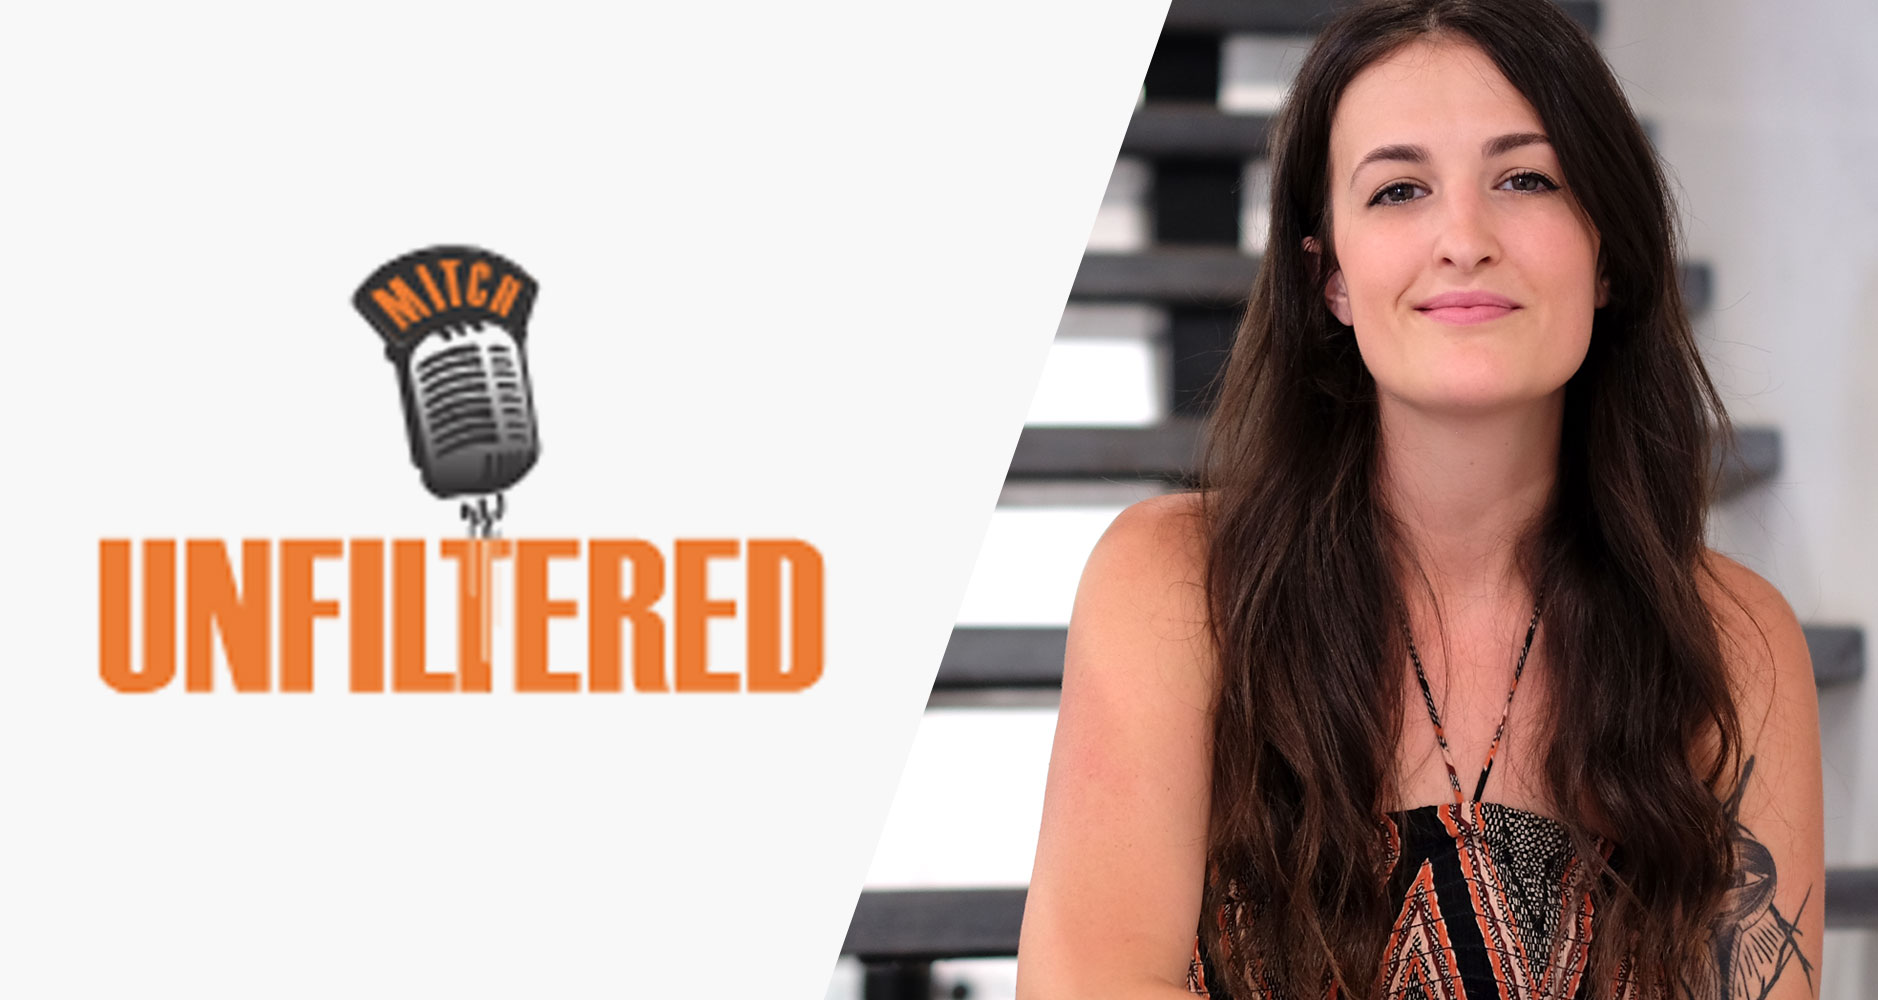 Samantha from Weldon Barber on Mitch Unfiltered.